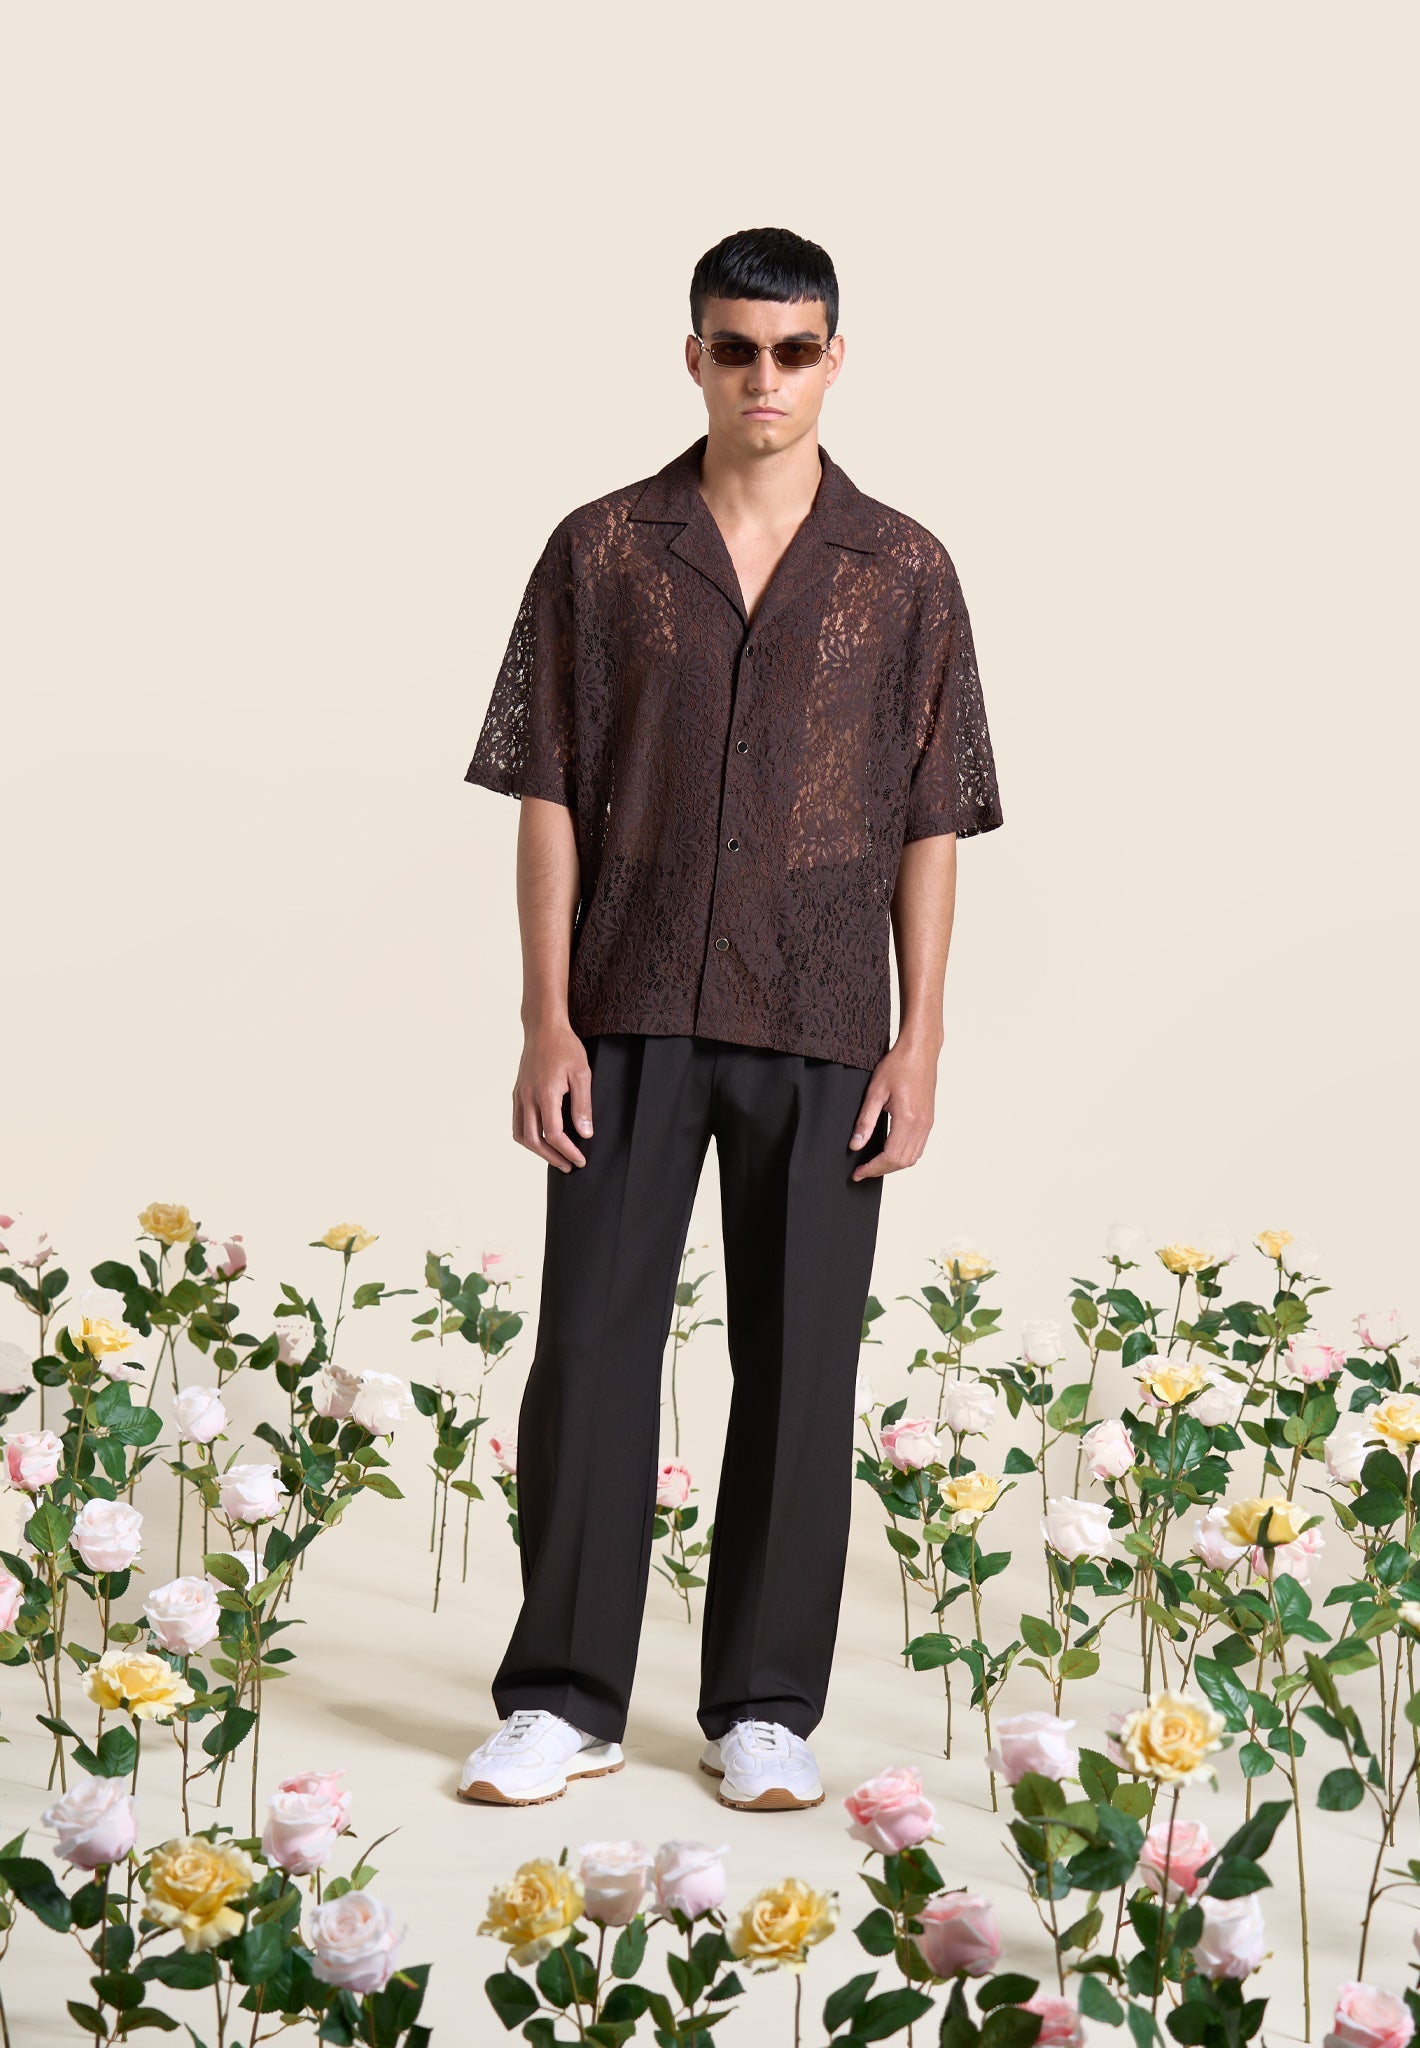 boxy-lace-revere-shirt-brown